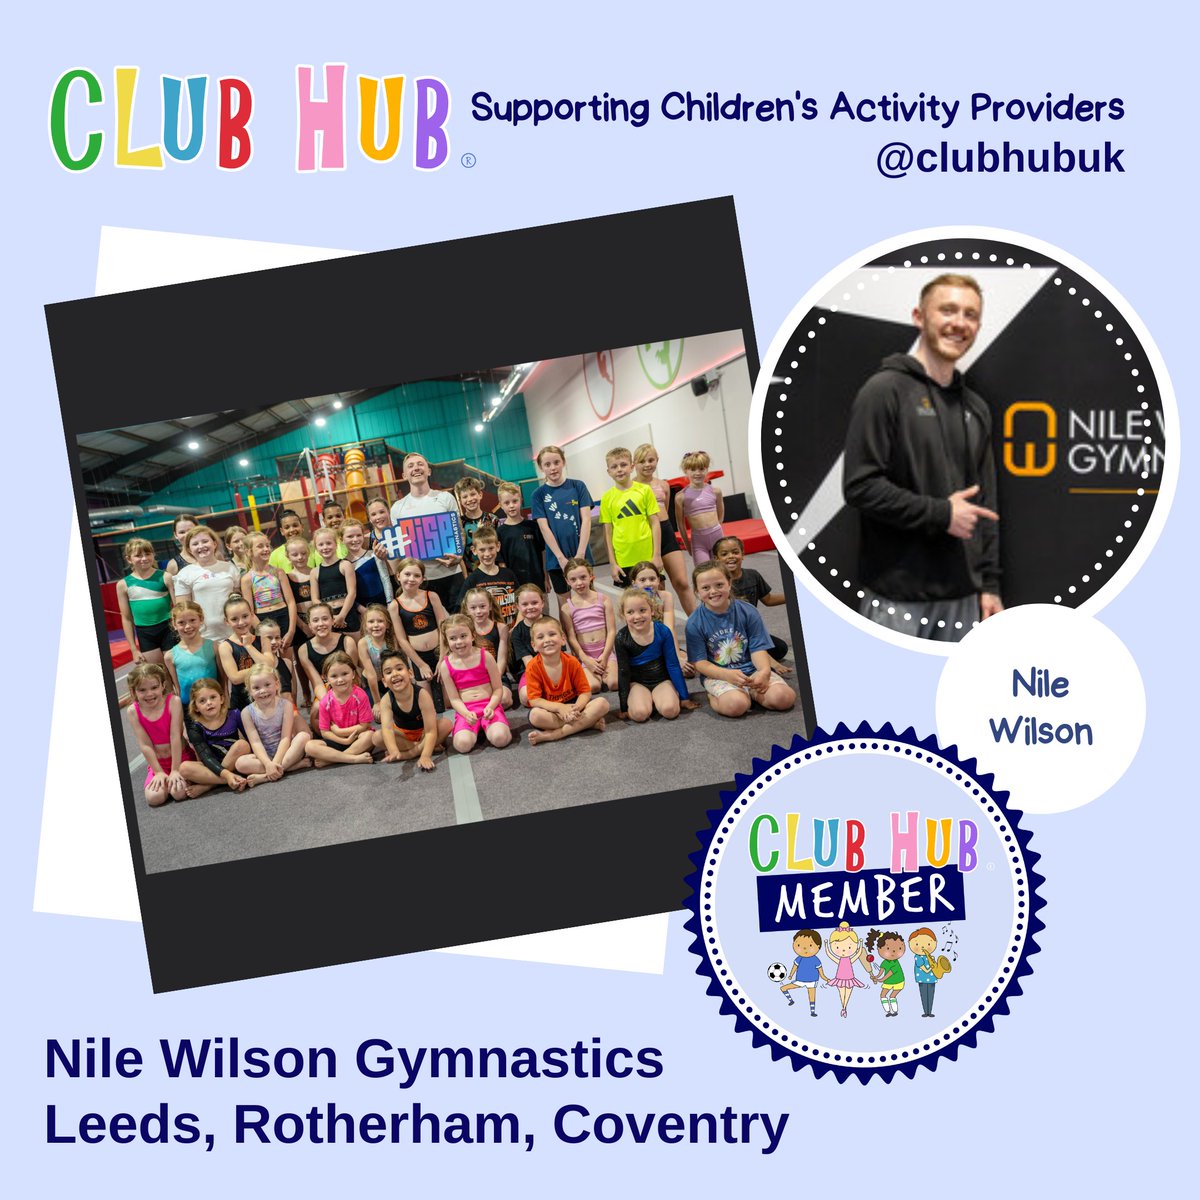 Nile Wilson's vision is to run gymnastics clubs around the country that ‘Change the Game’ 
Contact info@nilewilsongymnastics.com for more details 

#clubhubmember #clubhubuk #gymnasticsforkids #gymnasticsclasses #leedsmums #coventrymums #mansfieldmums #gymnasticstraining